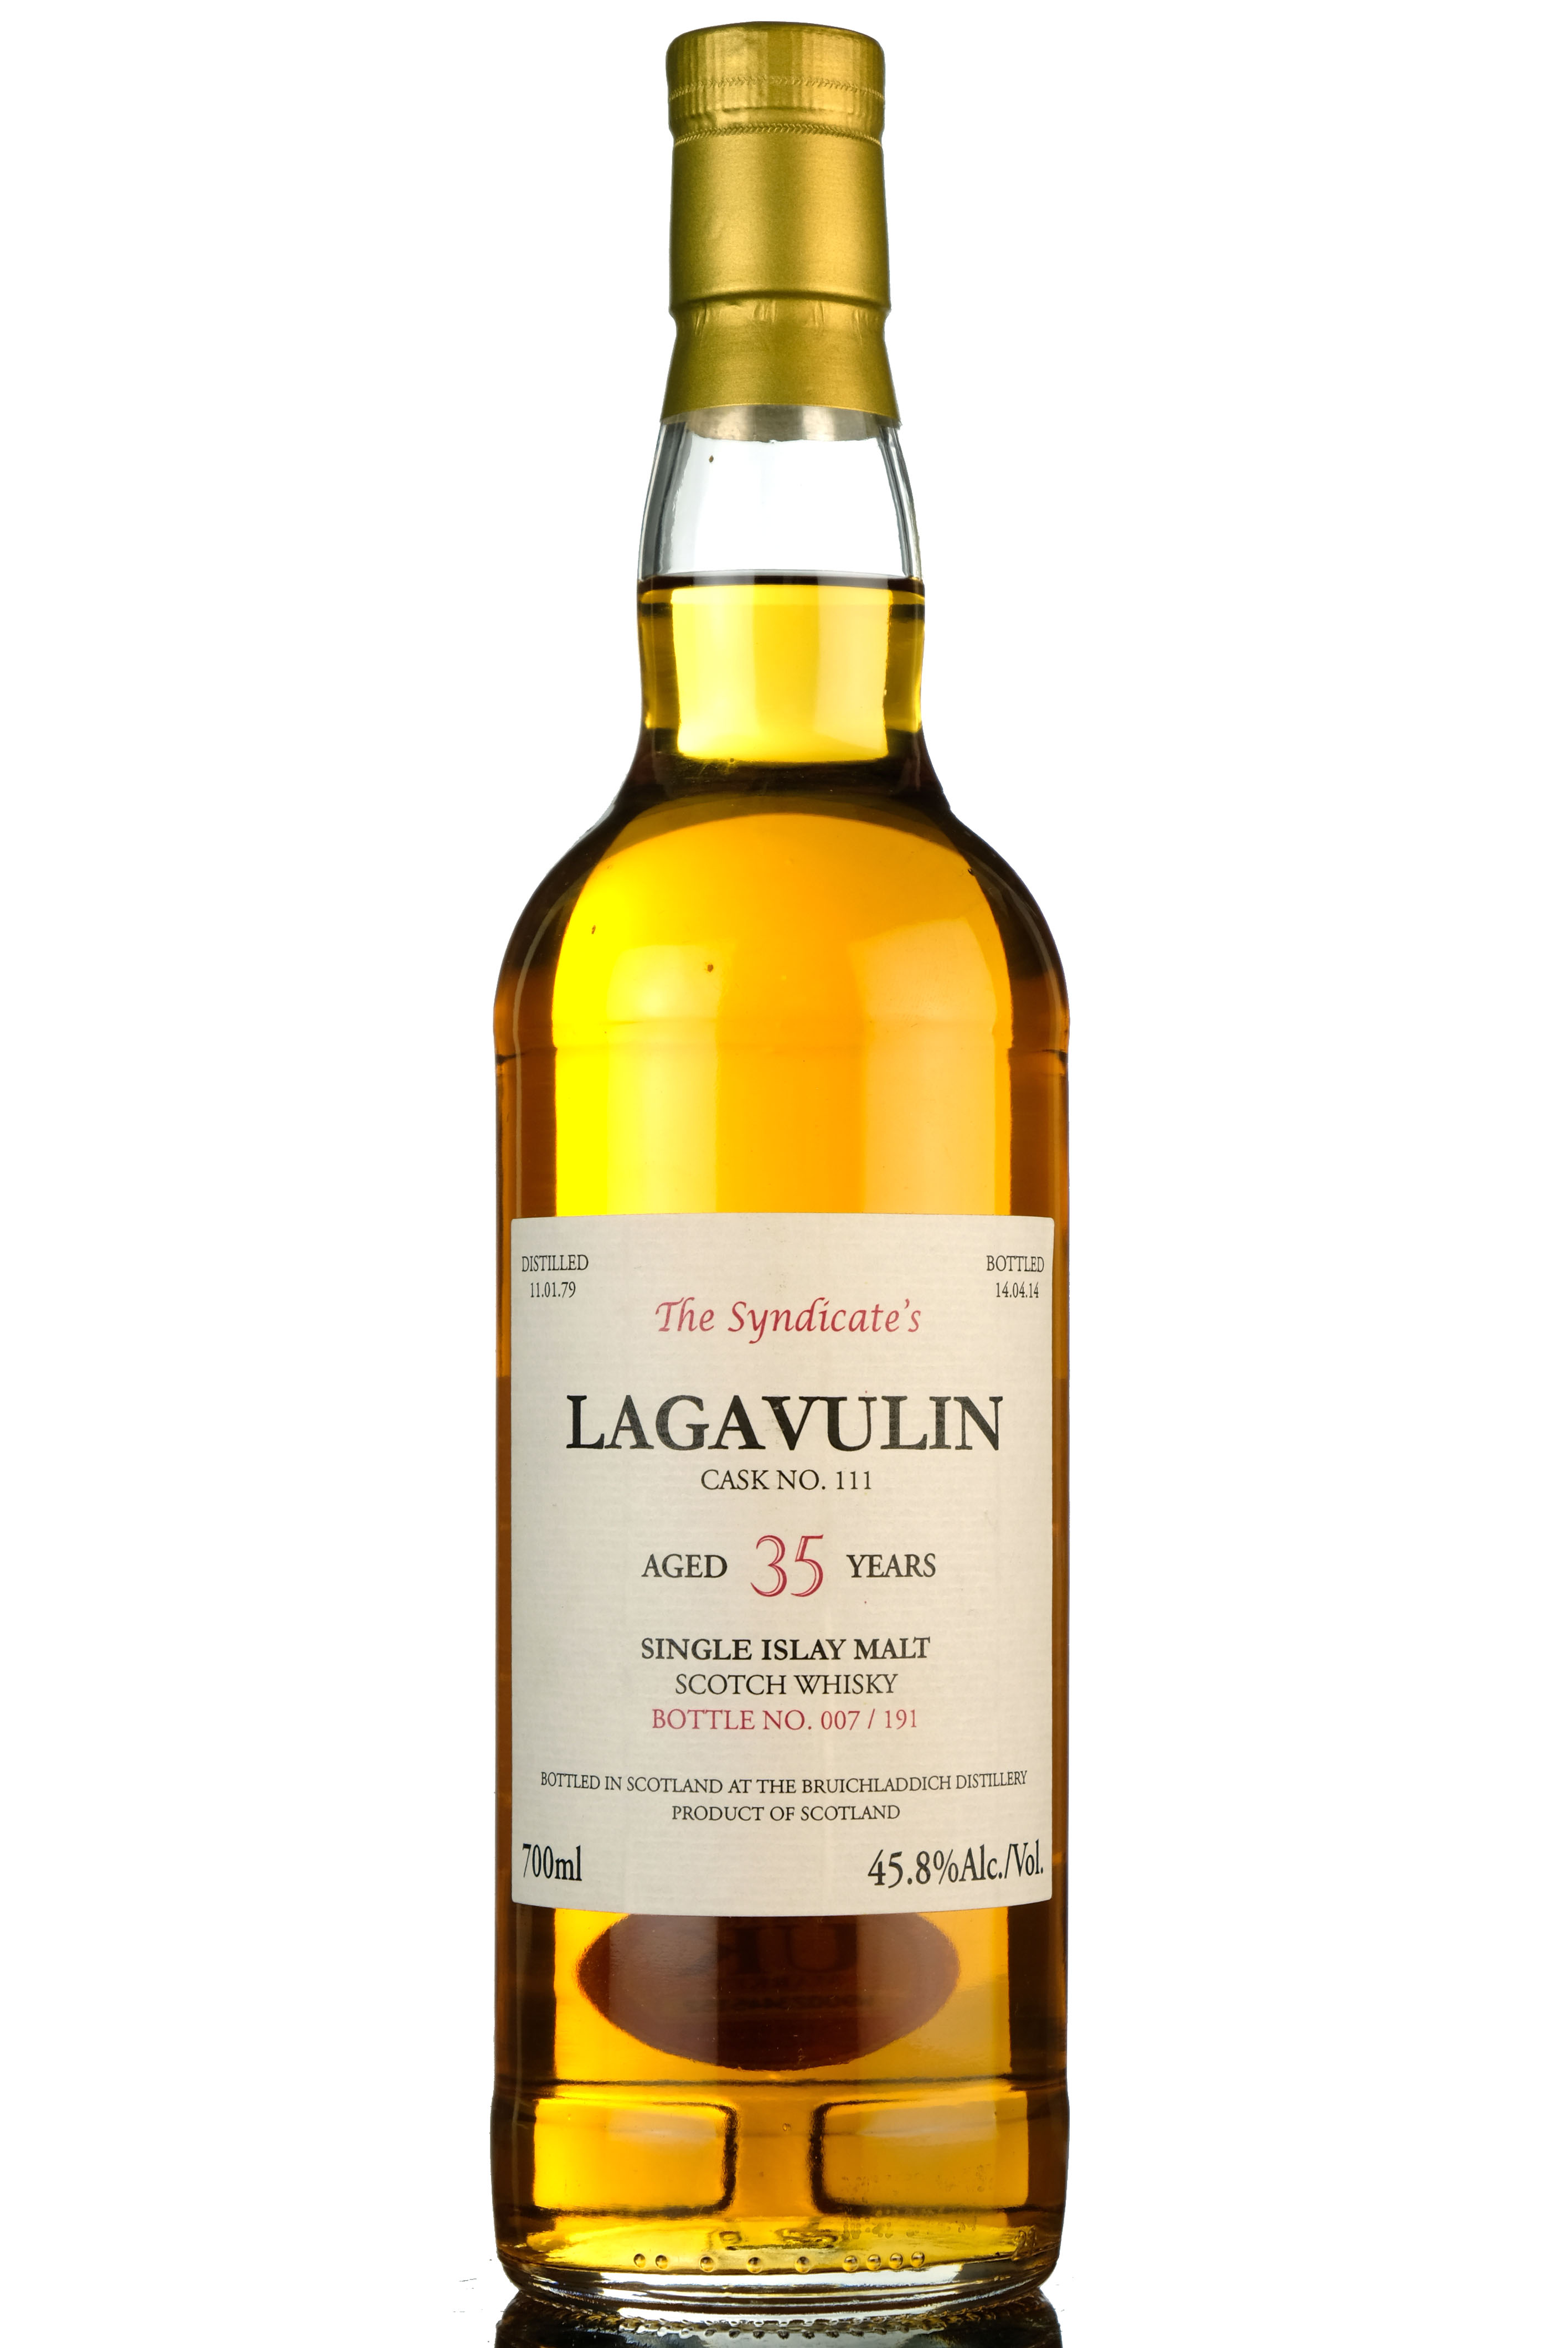 Lagavulin 1979-2014 - 35 Year Old - The Syndicates - Single Cask 111